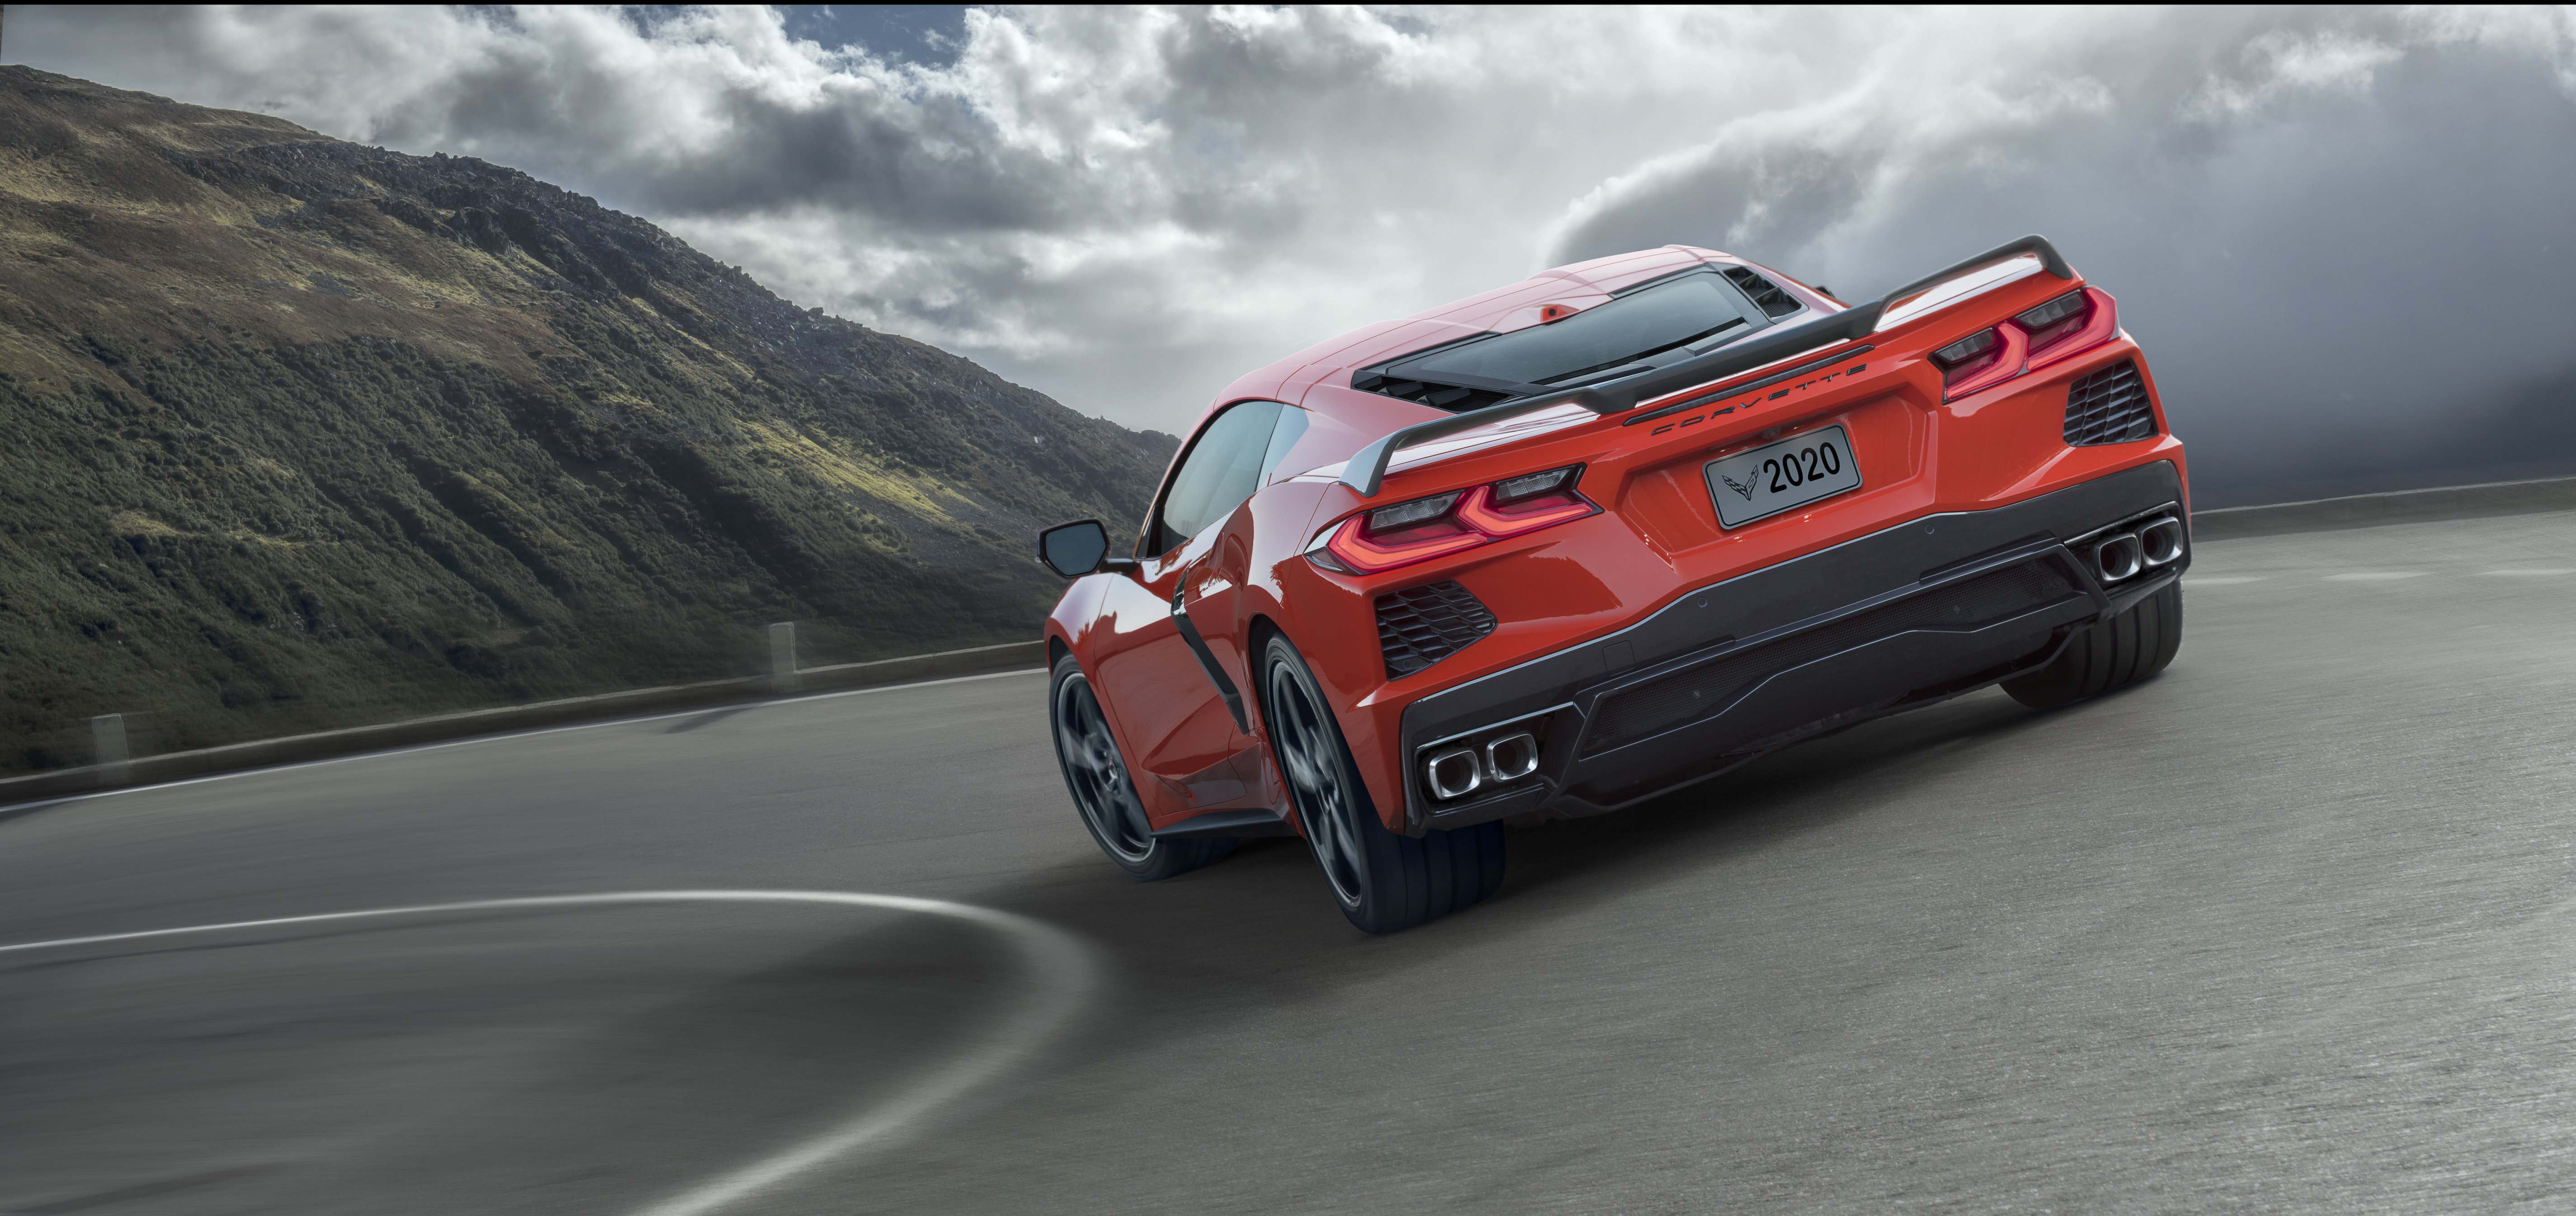 A red Corvette rounds a turn on a mountain pass.